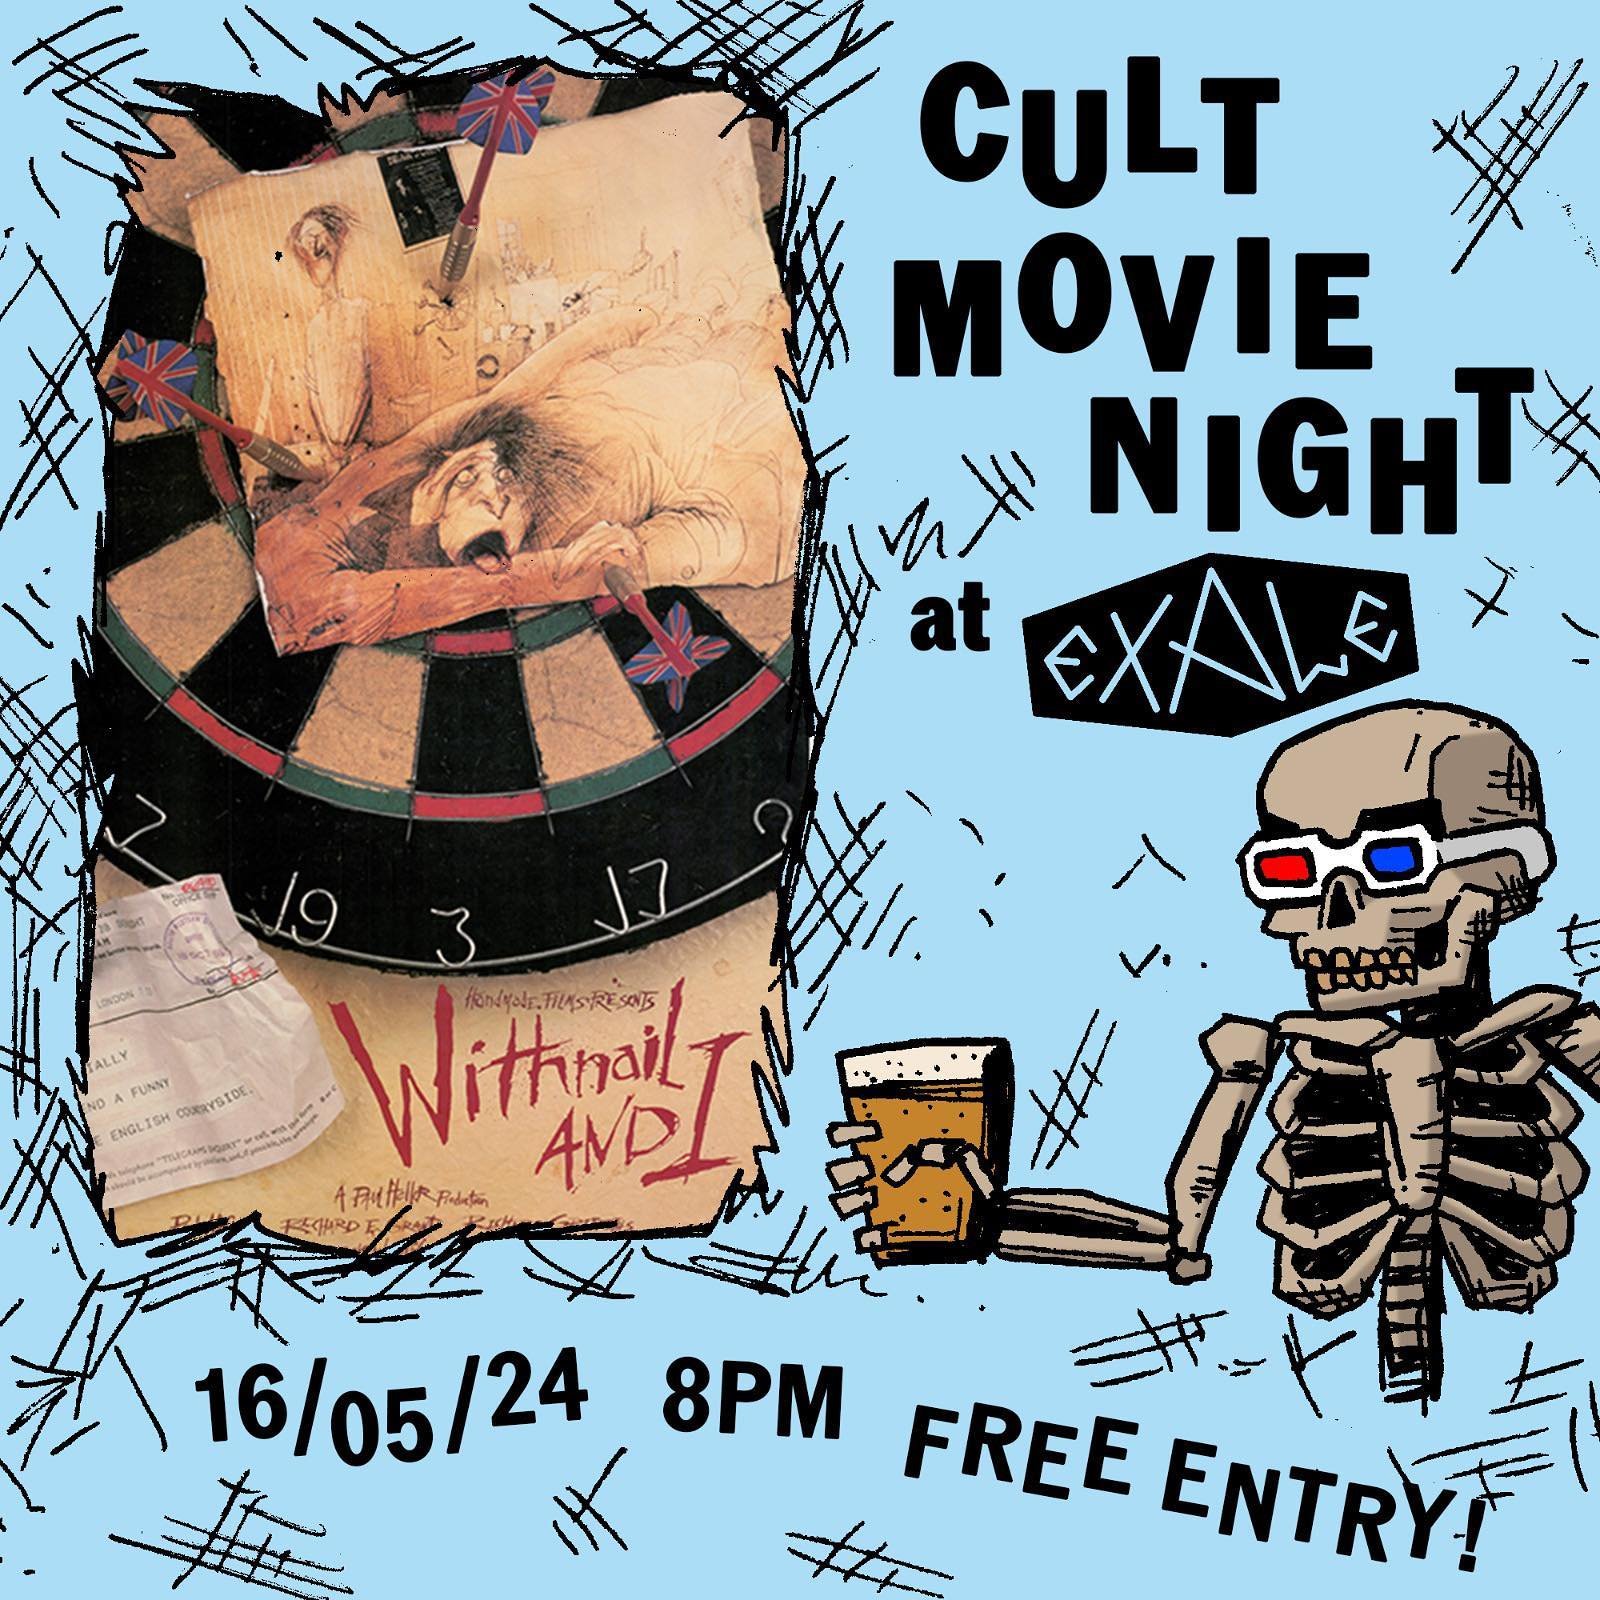 Cult move night returns to Exale Taproom NEXT WEEK! This time we&rsquo;re screening classic British comedy WITHNAIL &amp; I (1987), starring Richard E Grant and Paul McGann. On the 16th of May you can come and enjoy one of the most quotable films of 